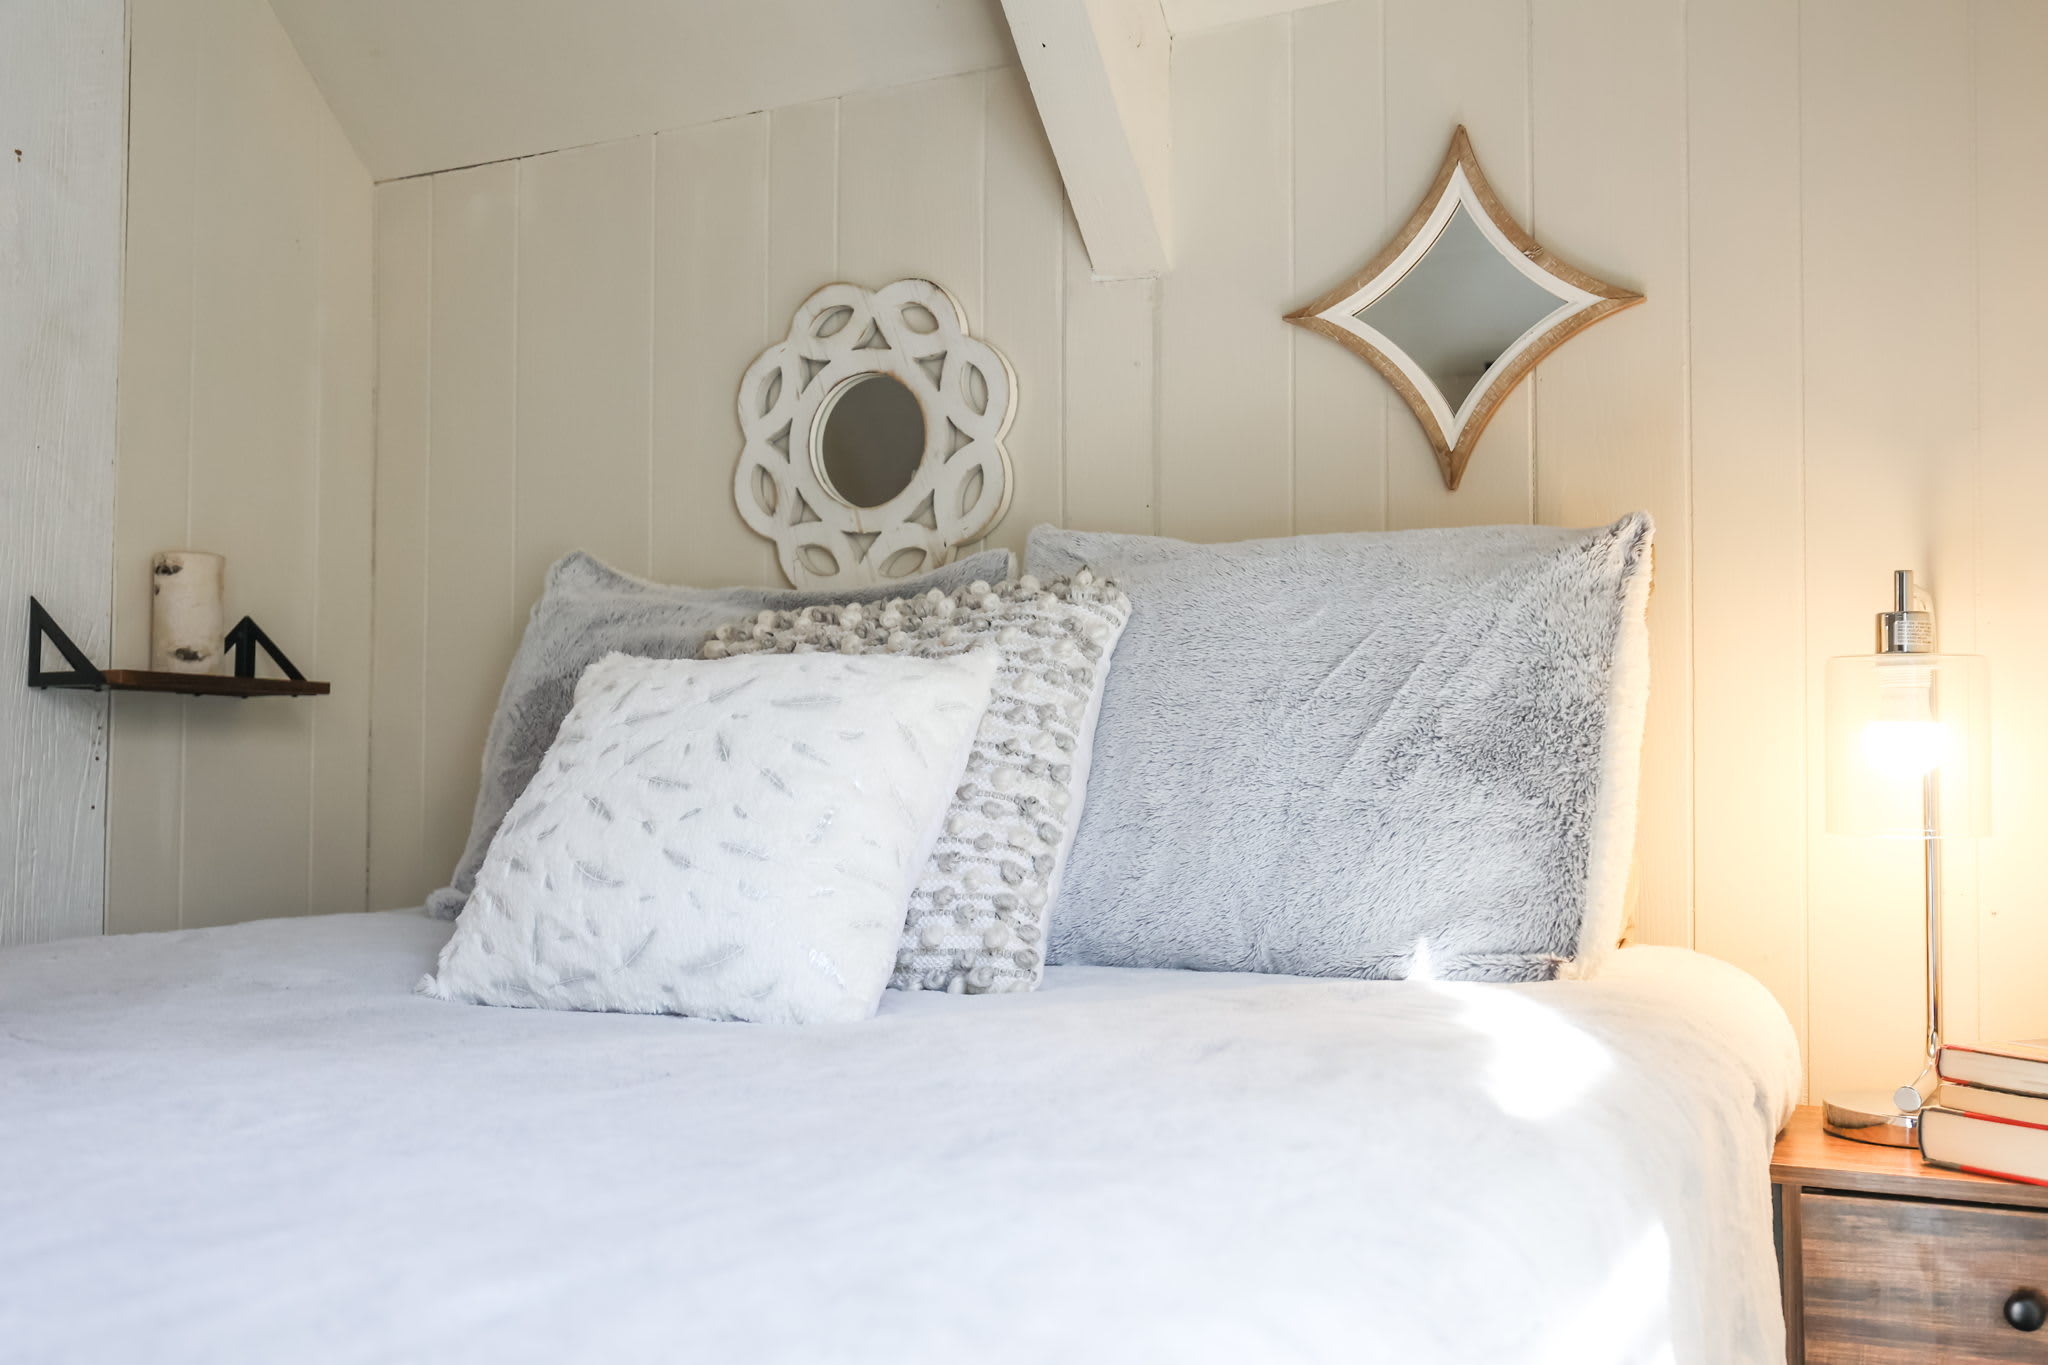 Lofty dreams: Experience the pinnacle of comfort in our loft, where a Queen-Size Bed with soft pillows, fine linens, and cozy sheets awaits your perfect night's sleep.